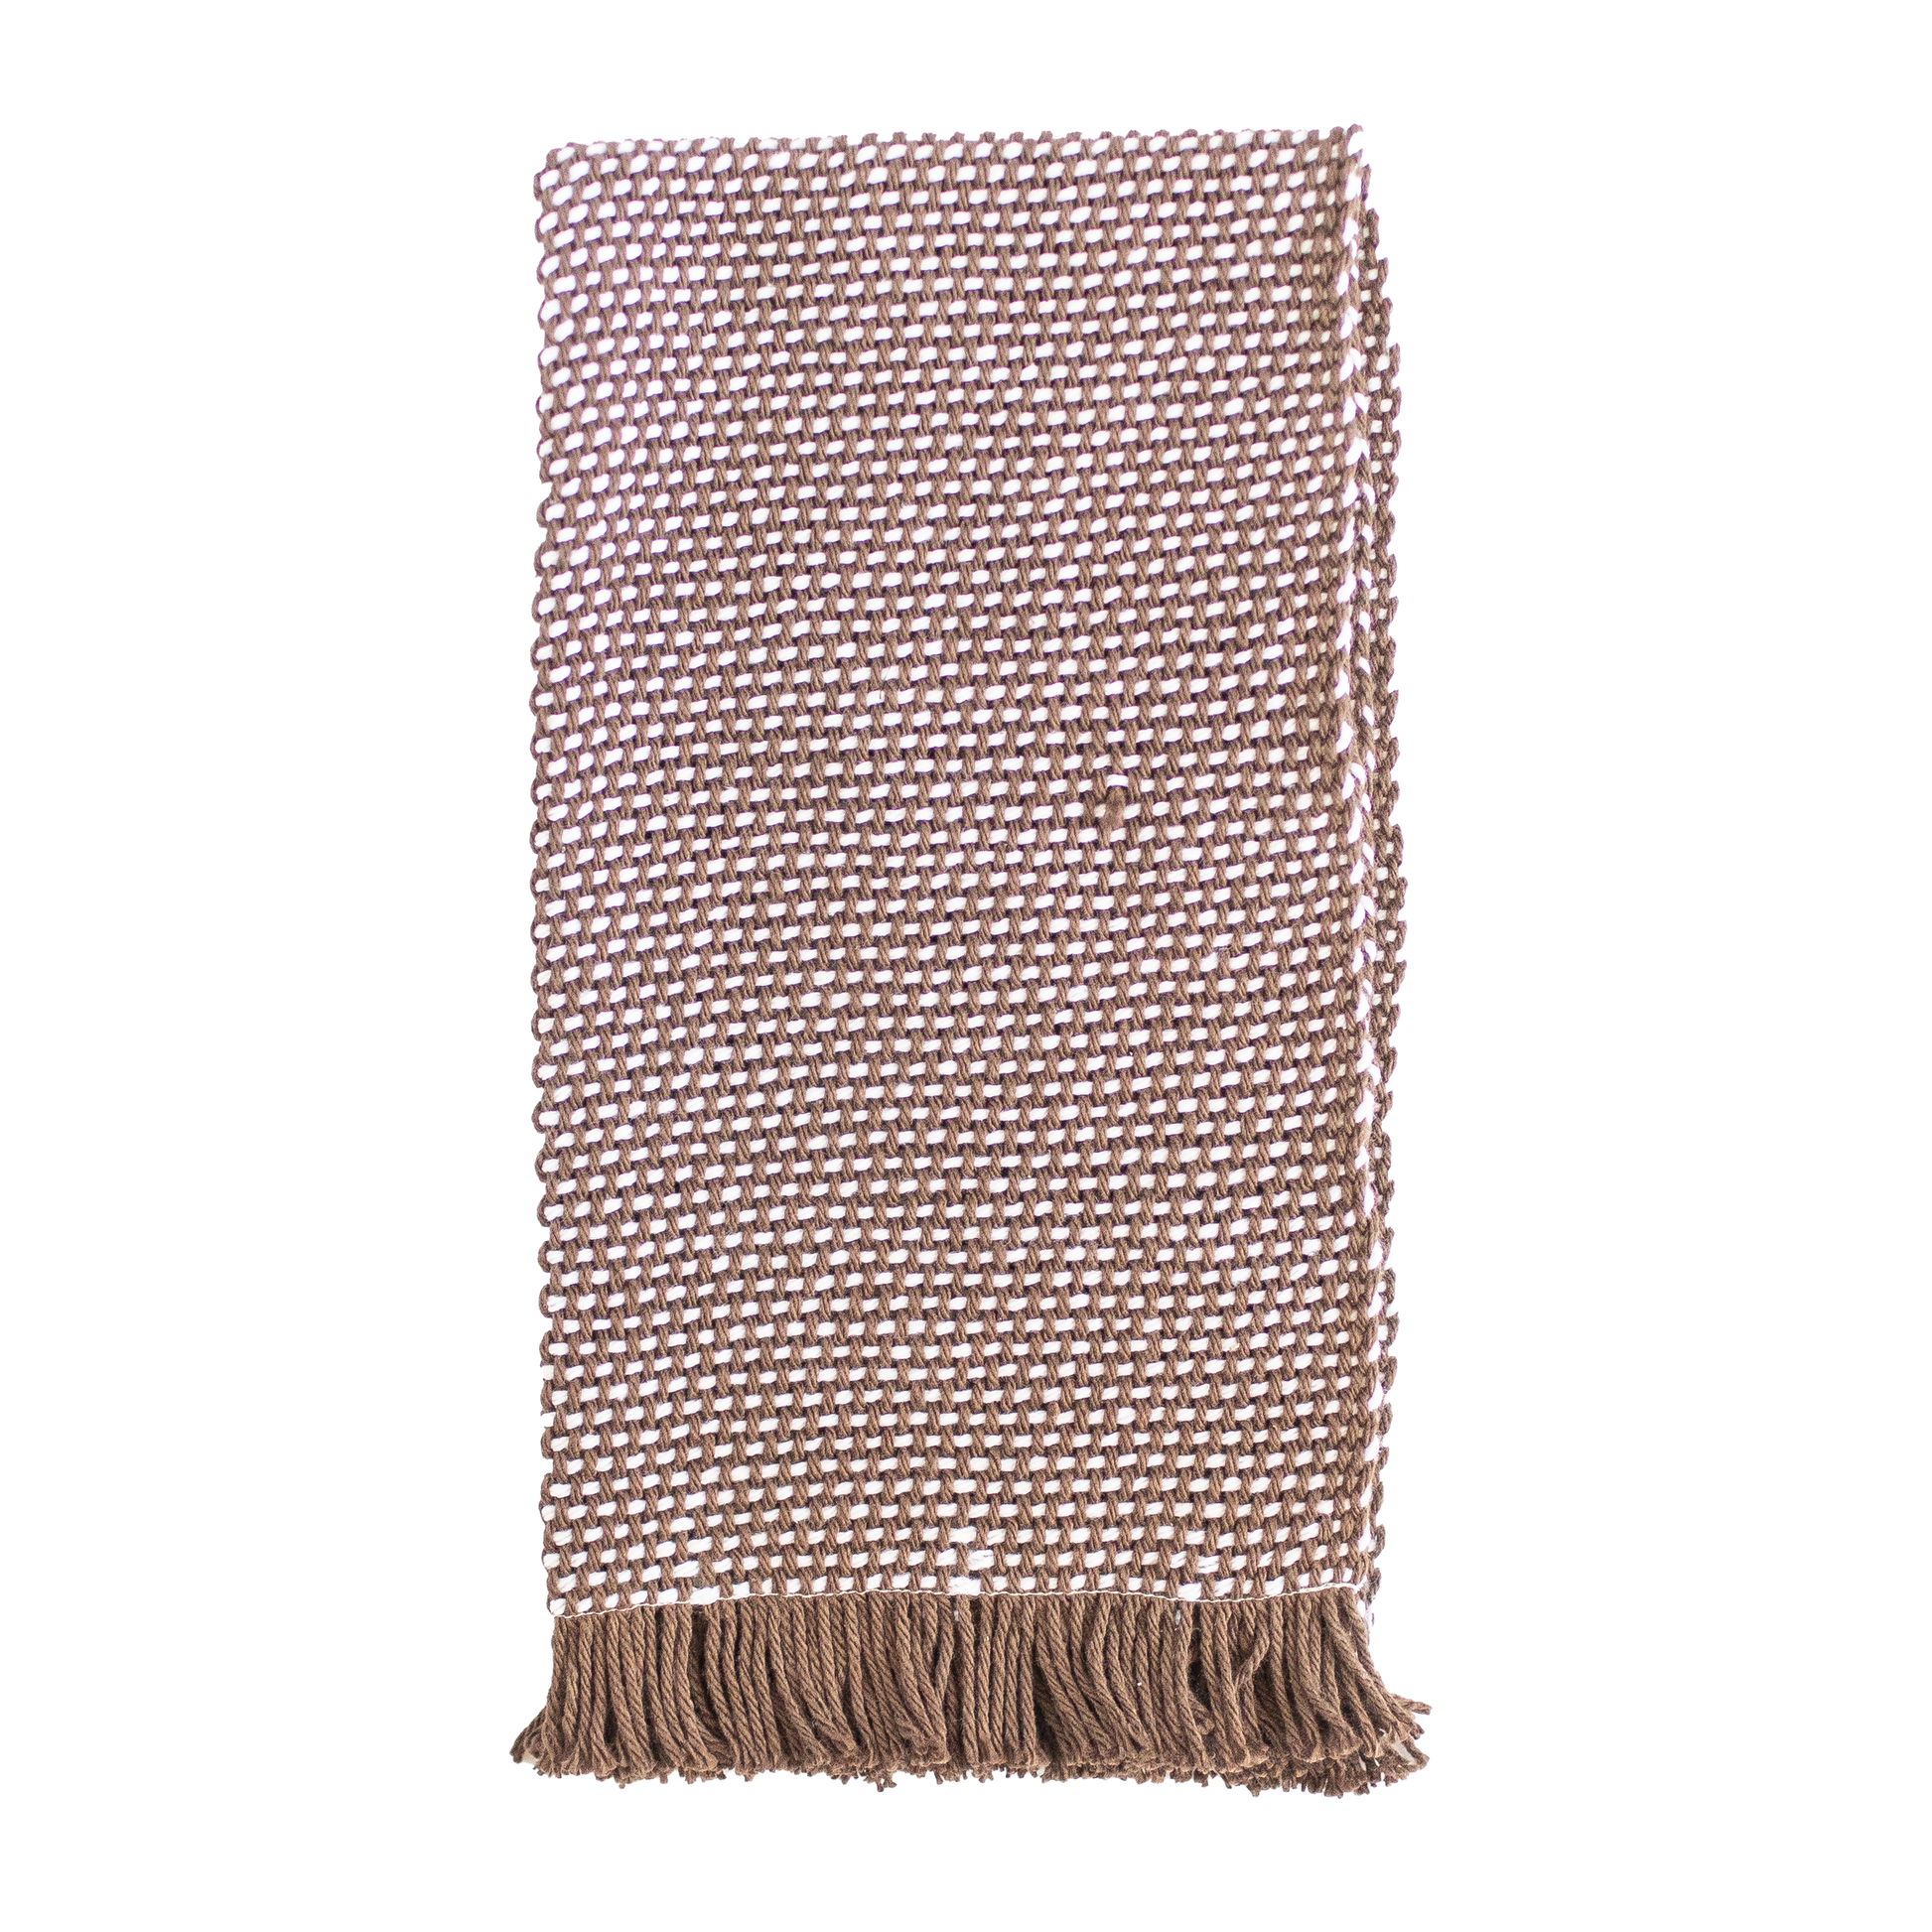 Folded chocolate and white hand towel